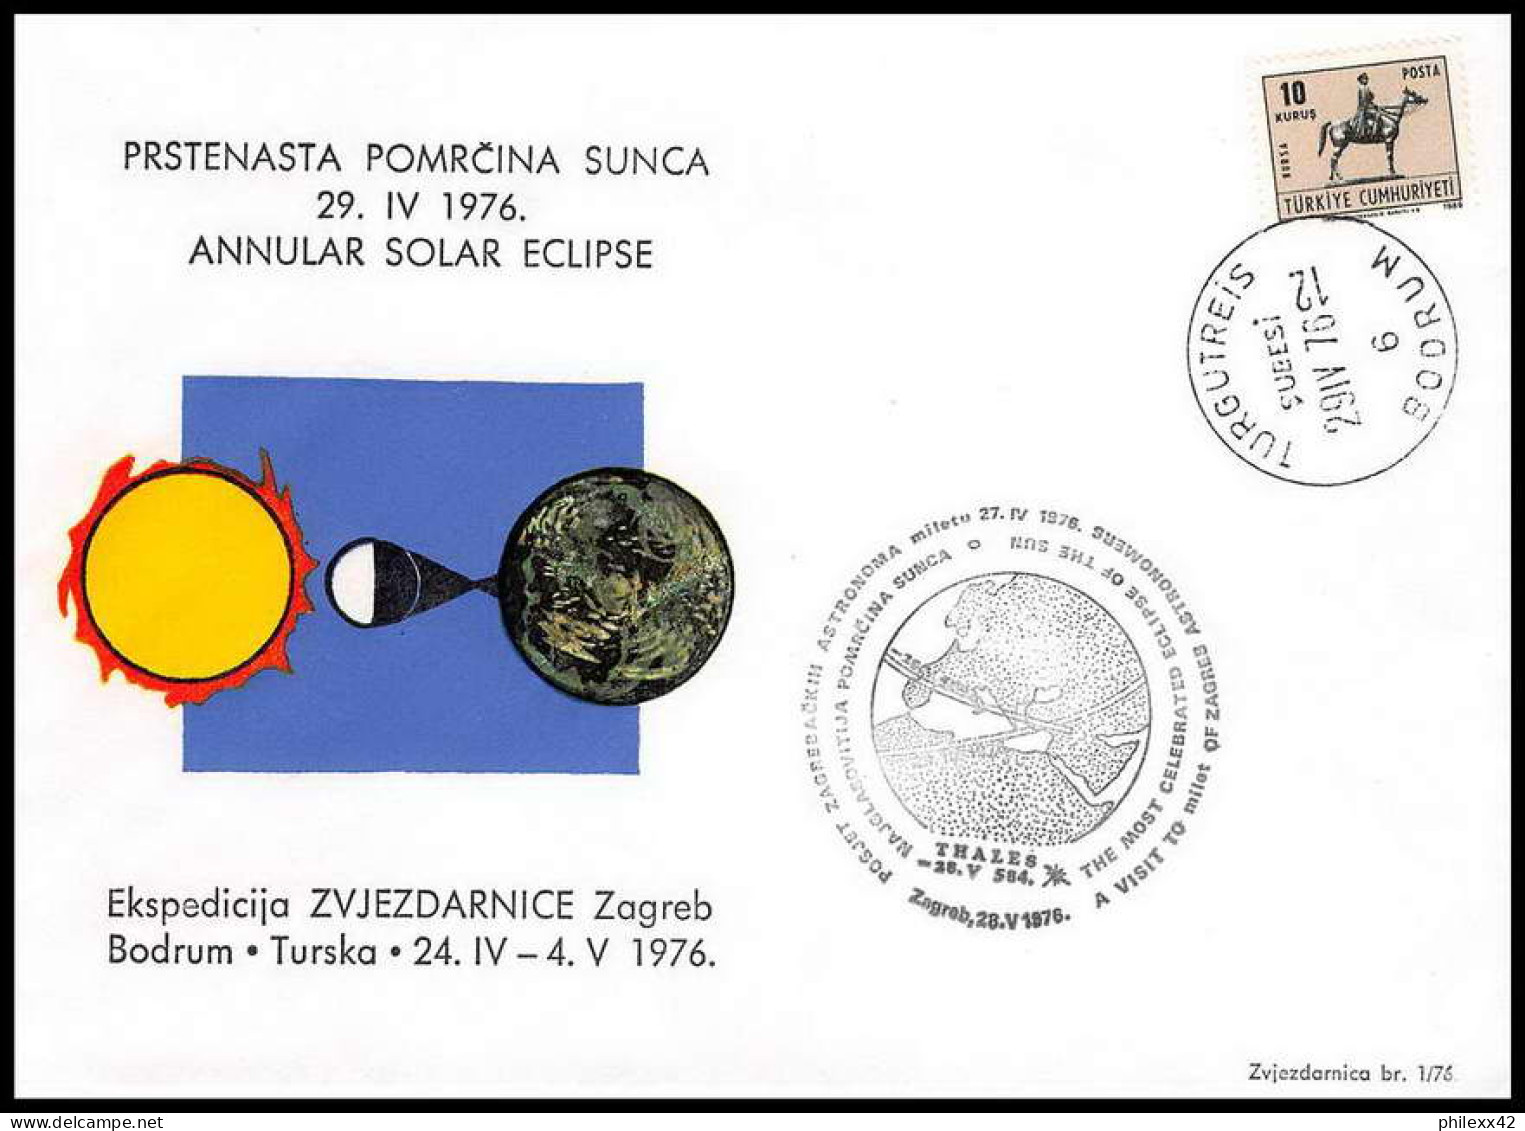 discount 75 cent piece collection lot 4 - 76 Lettres covers espace space différentes usa japan russia france fdc